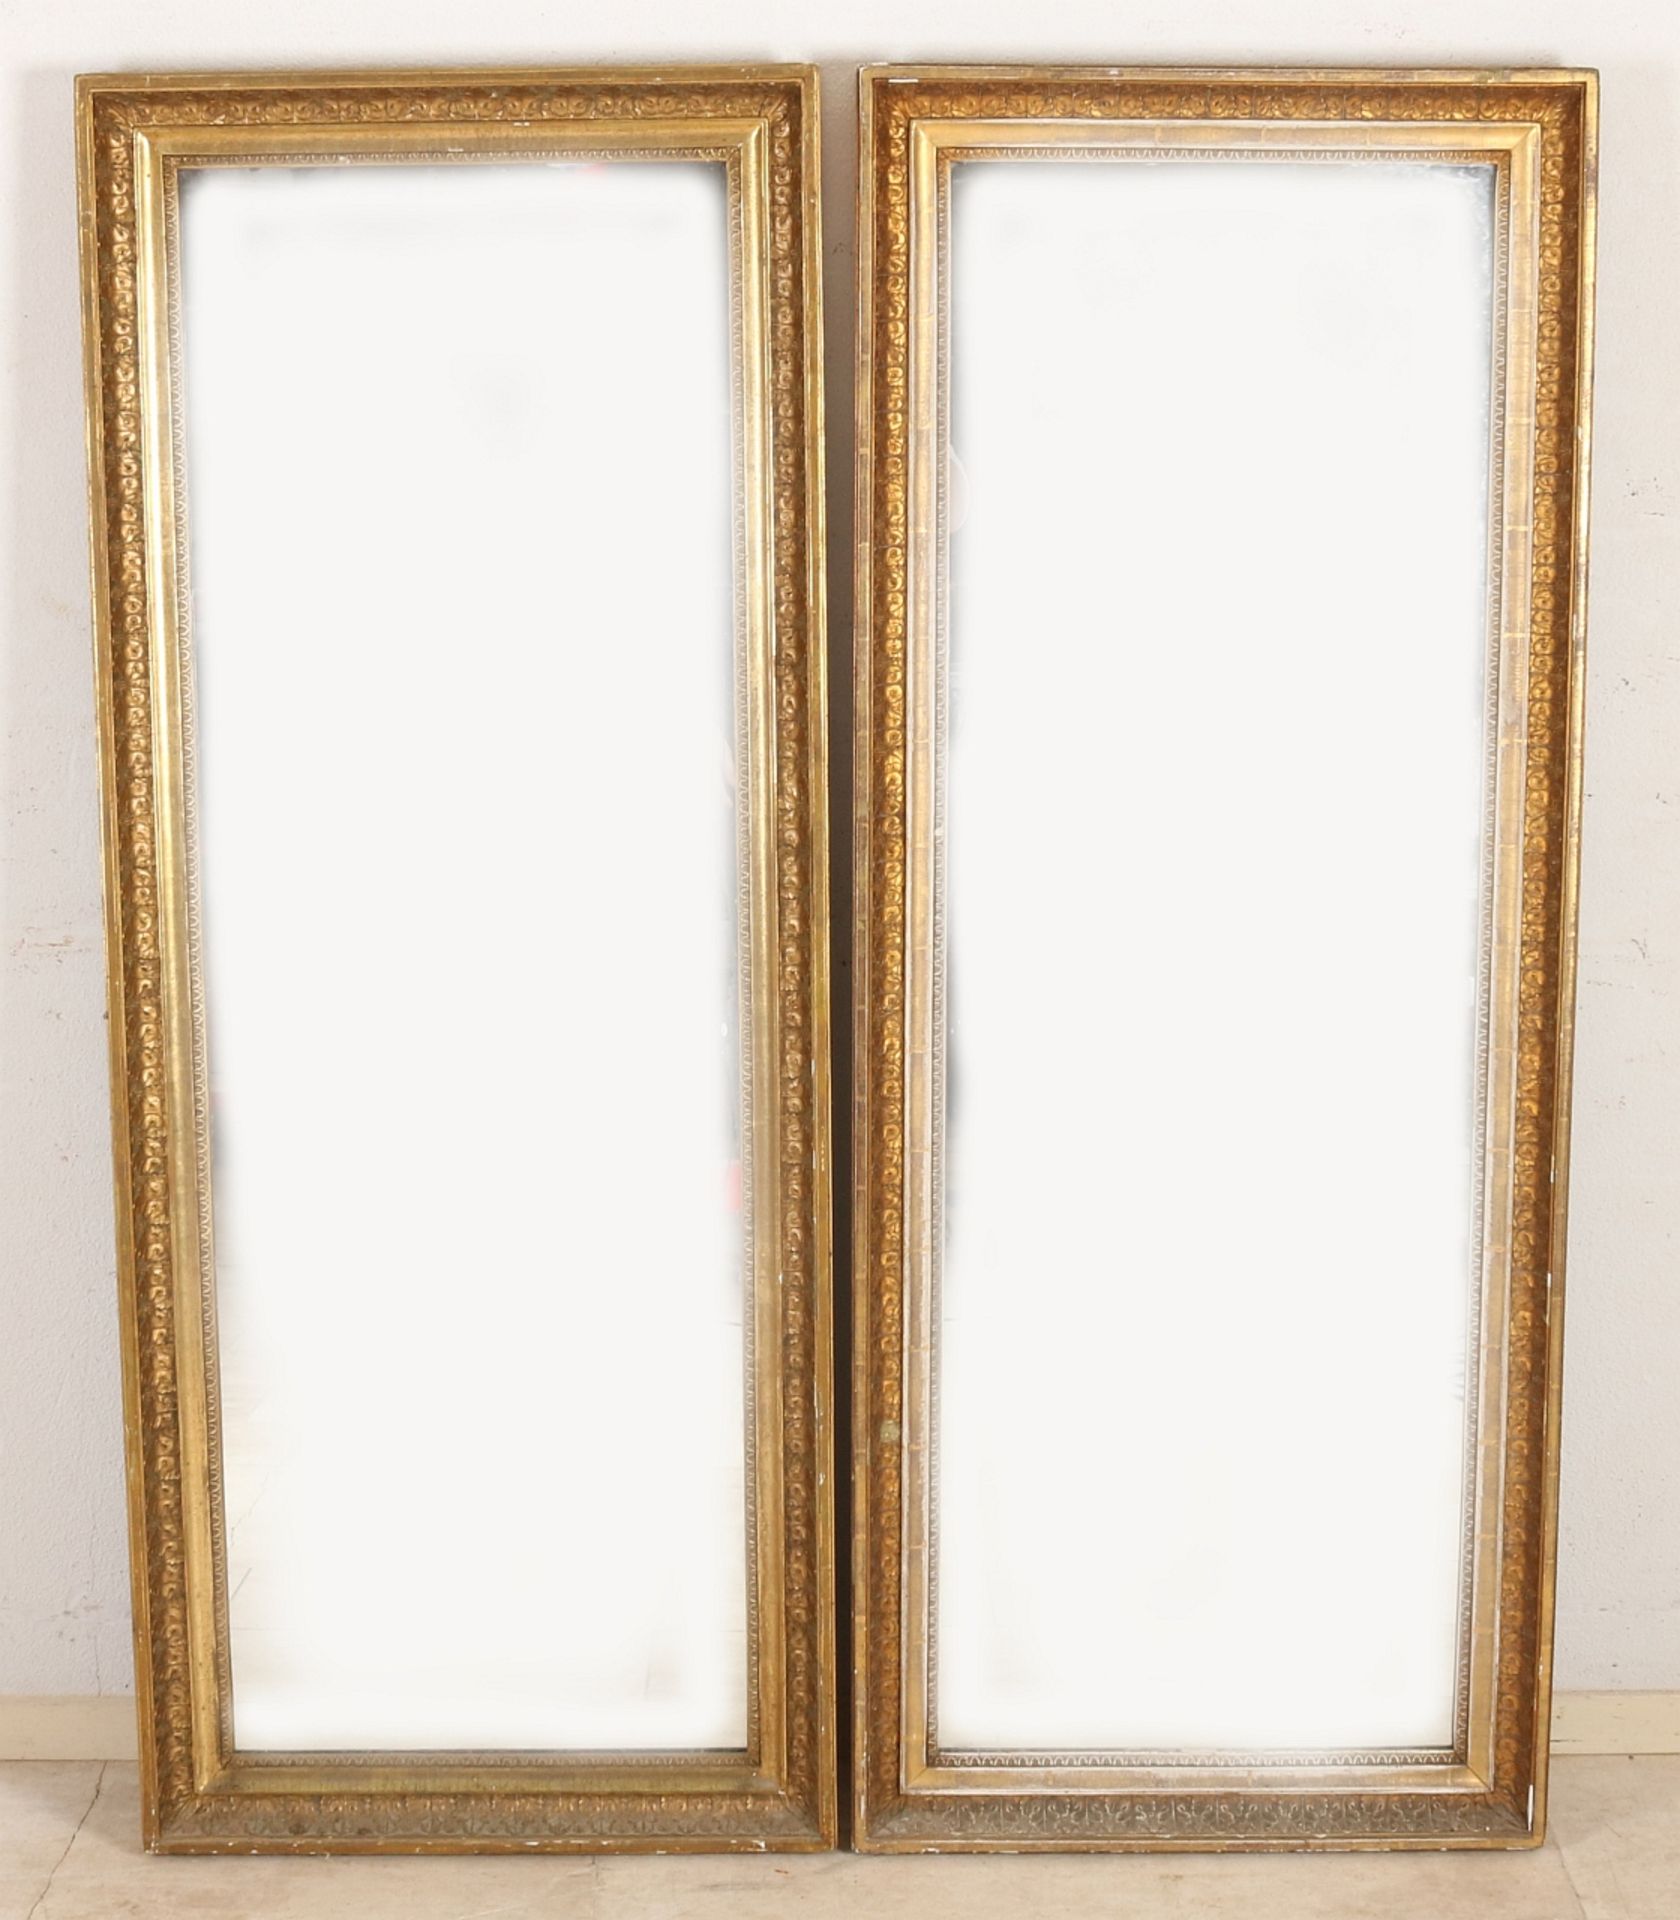 Two gilded mirrors